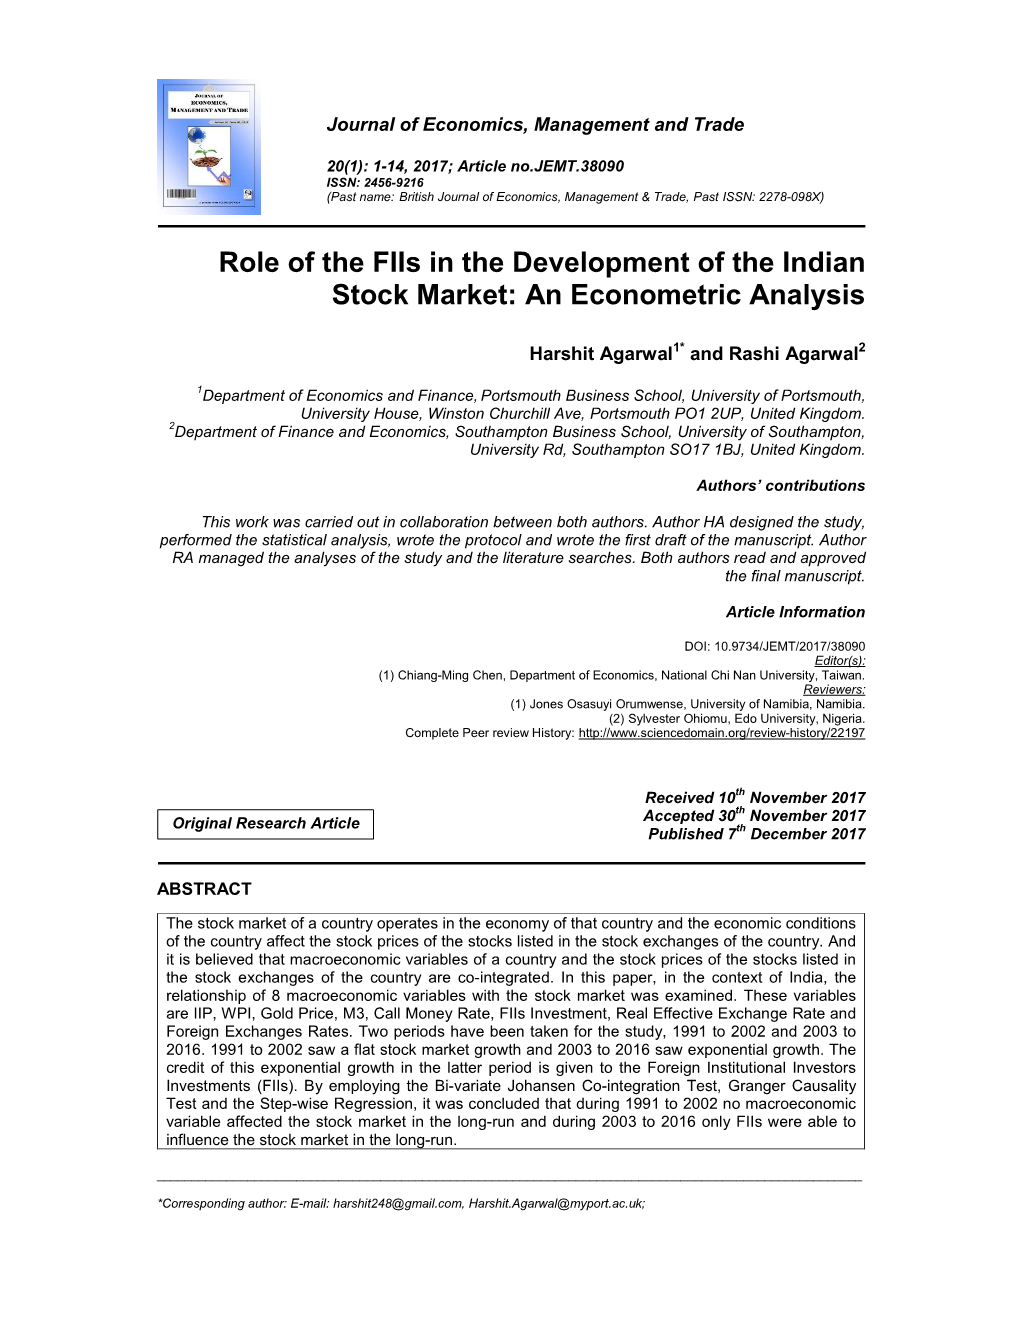 Role of the Fiis in the Development of the Indian Stock Market: an Econometric Analysis